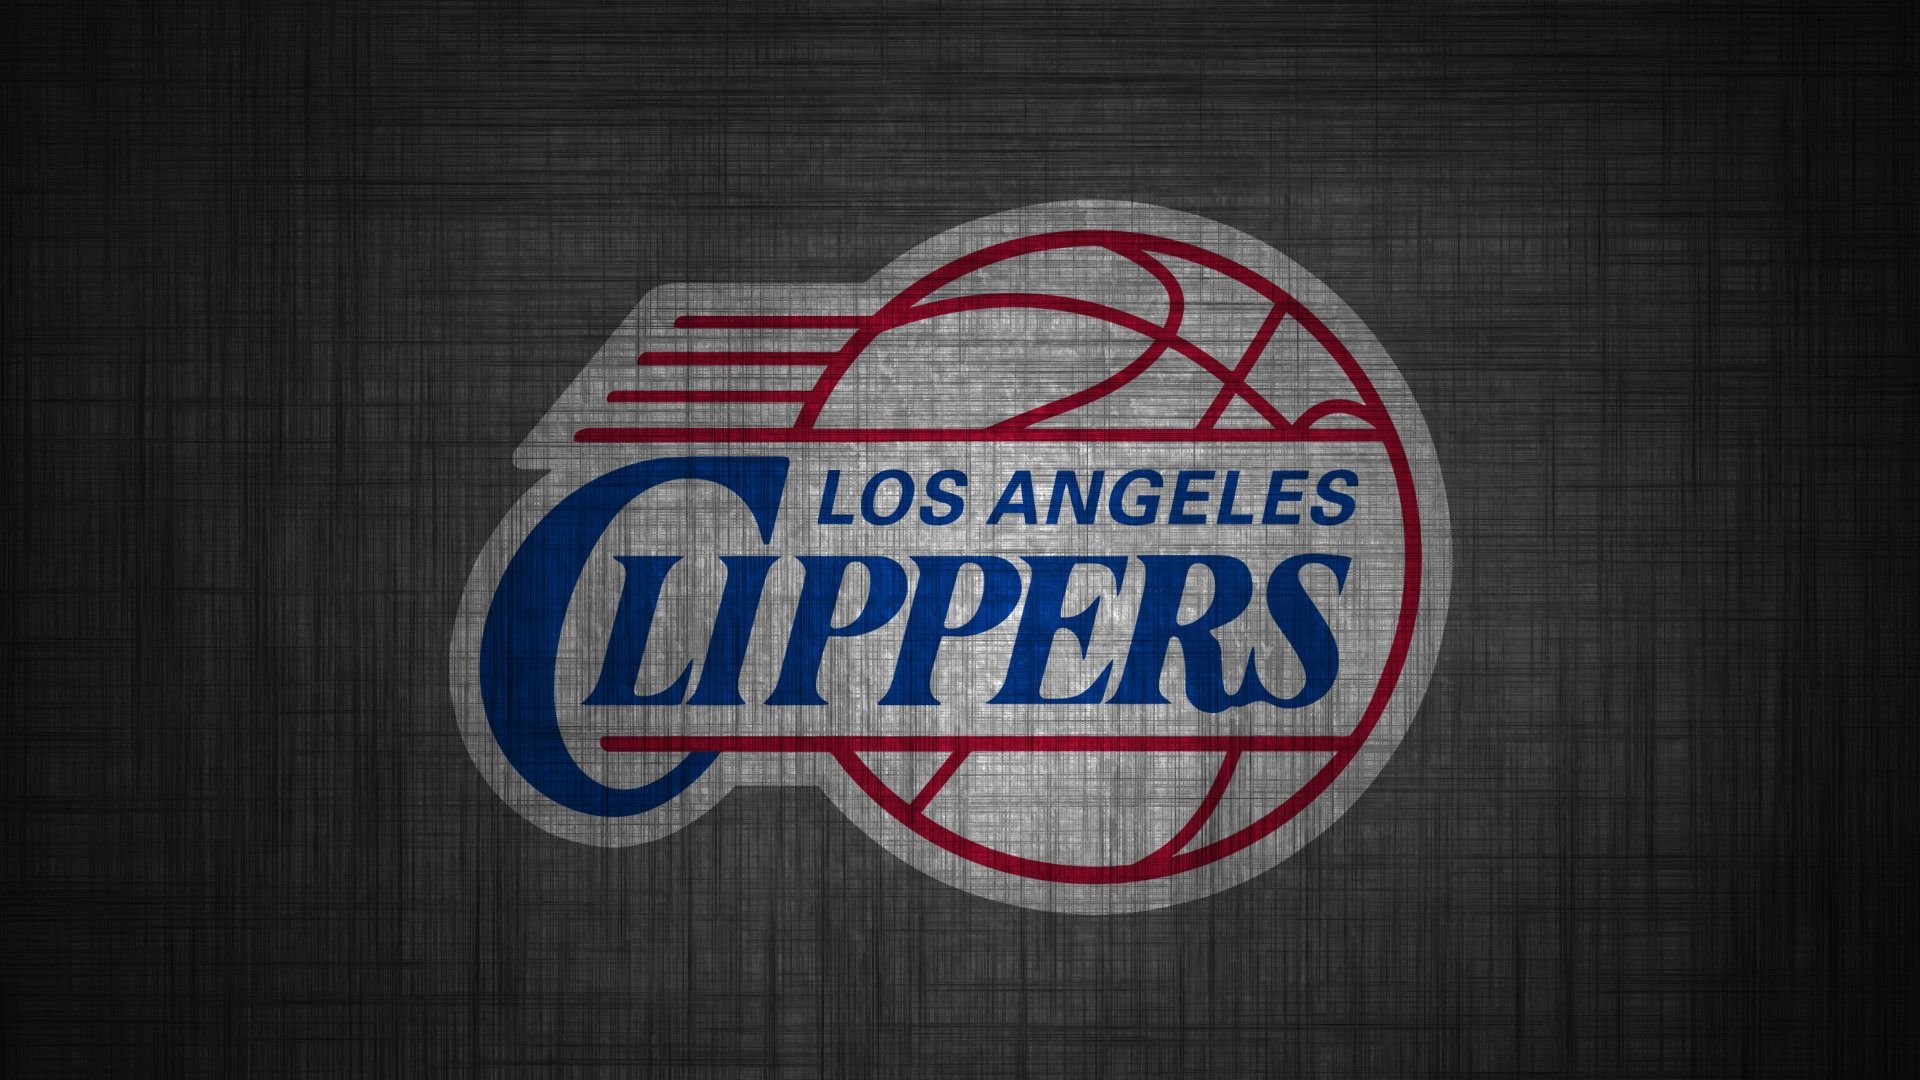 Los Angeles Clippers For Mac Wallpaper with high-resolution 1920x1080 pixel. You can use this wallpaper for your Desktop Computer Backgrounds, Windows or Mac Screensavers, iPhone Lock screen, Tablet or Android and another Mobile Phone device